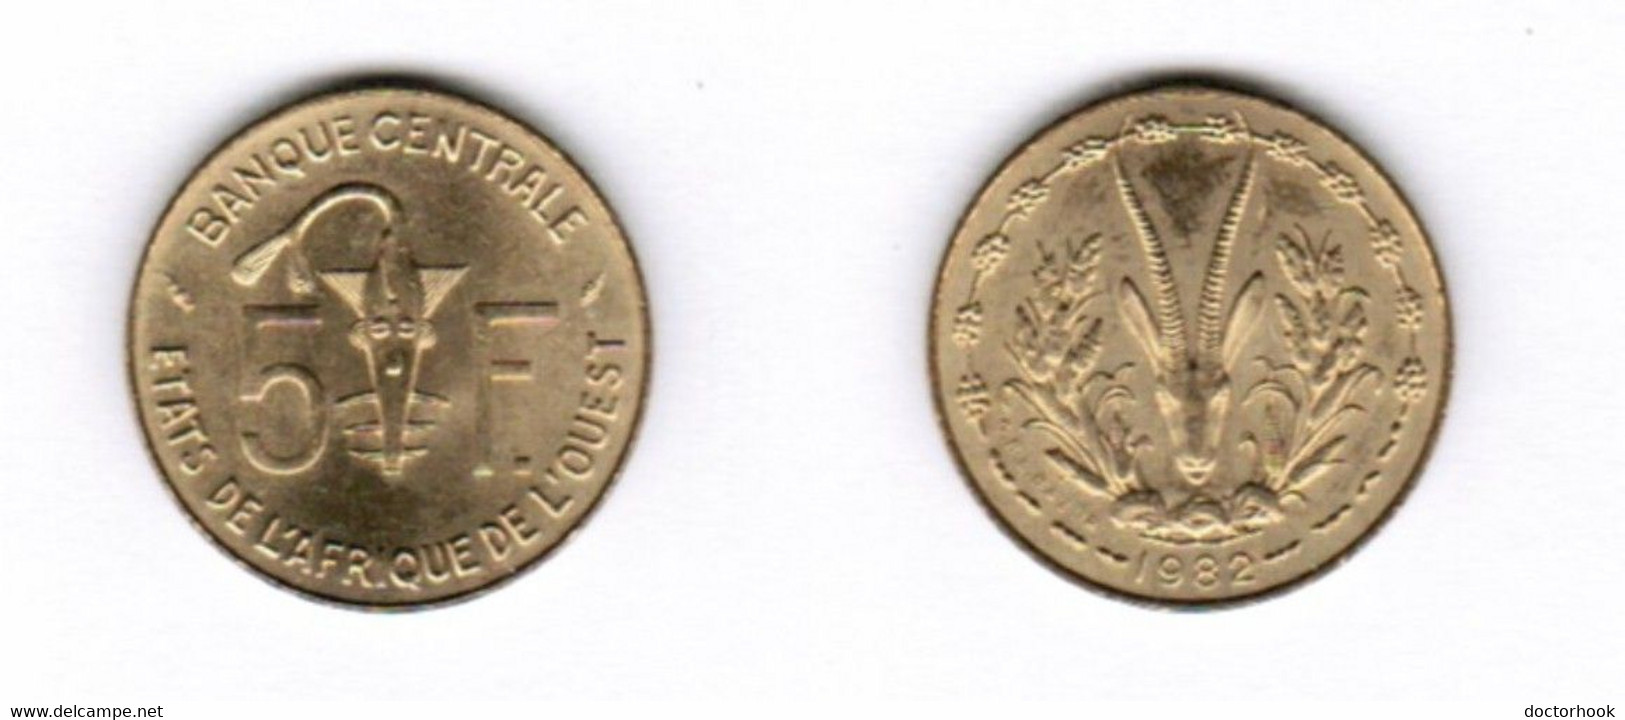 FRENCH WEST AFRICA   5 FRANCS 1982 (KM # 2a) #7011 - Africa Occidentale Francese